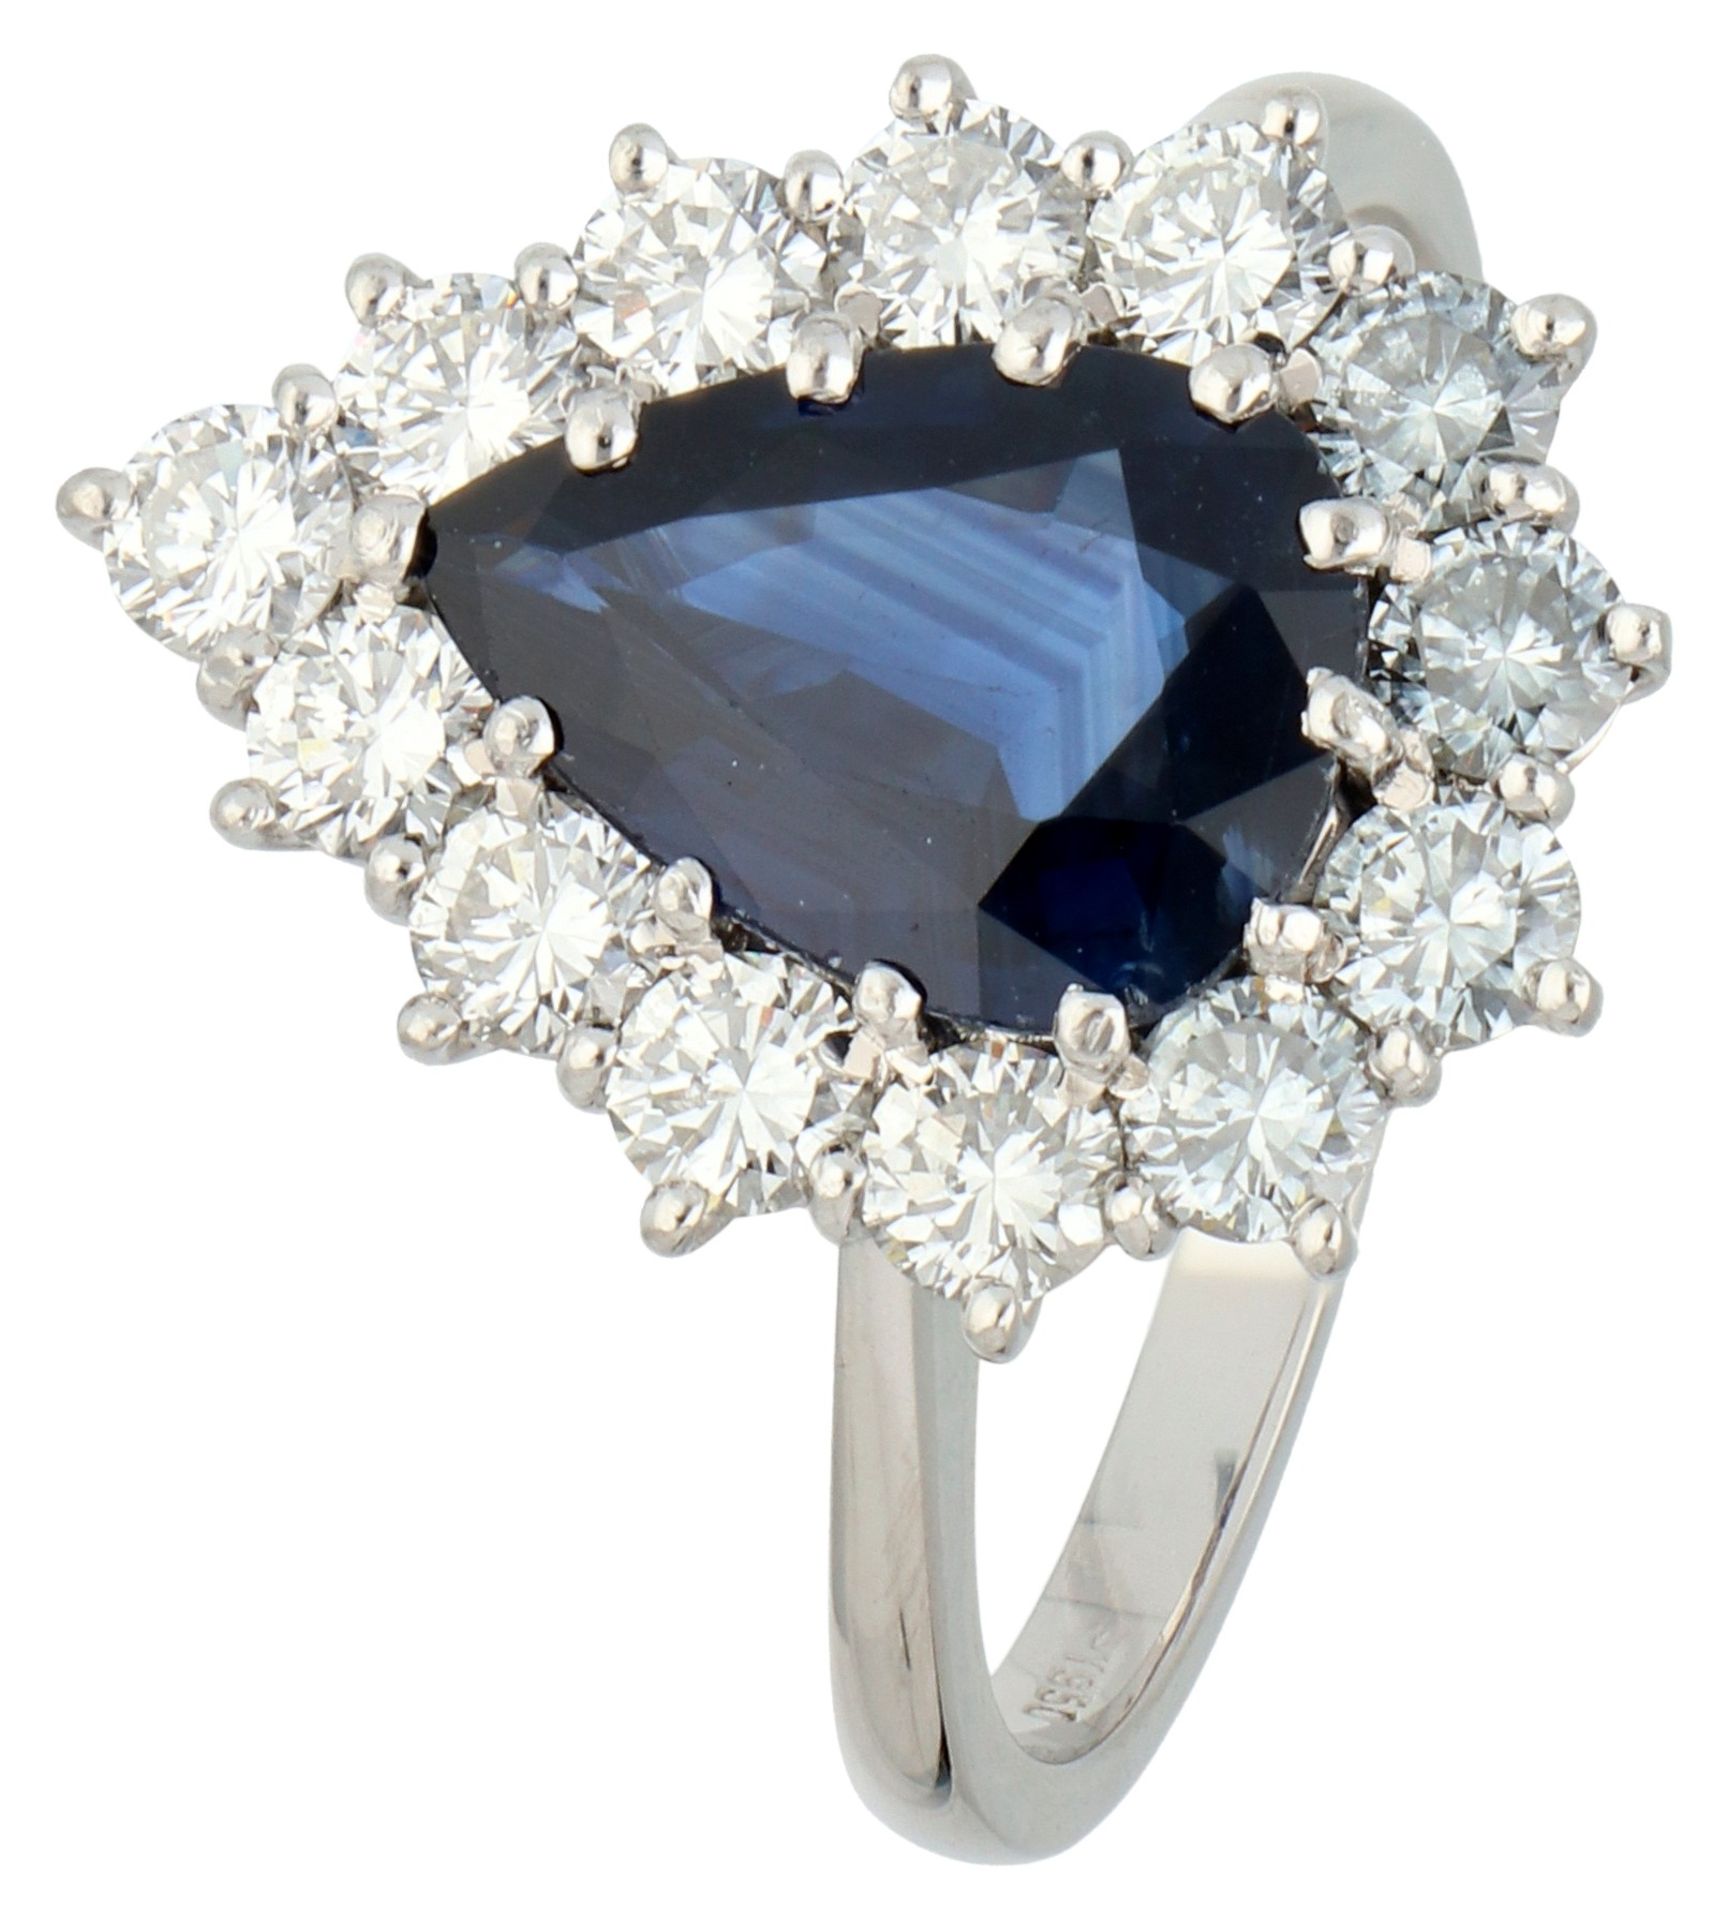 Platinum entourage ring set with approx. 3.0 ct. natural sapphire and diamond.